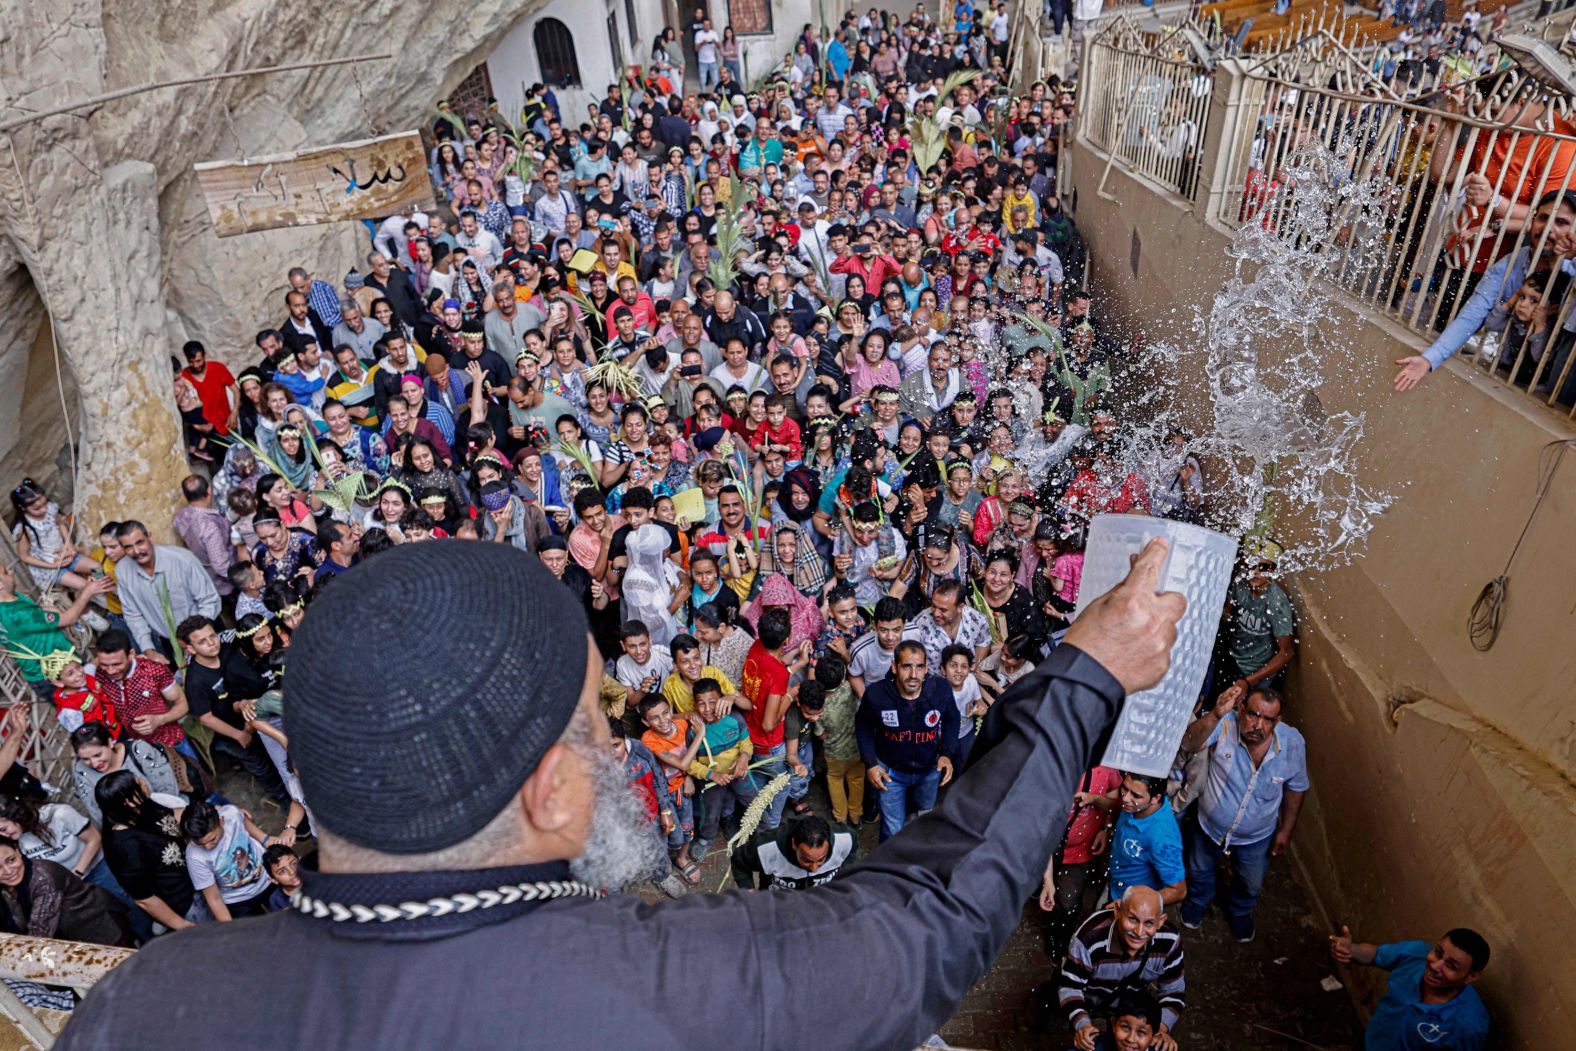 A Coptic priest sprinkles holy water during Palm Sunday Mass at the St. Simon Monastery in Cairo on Sunday, April 9.